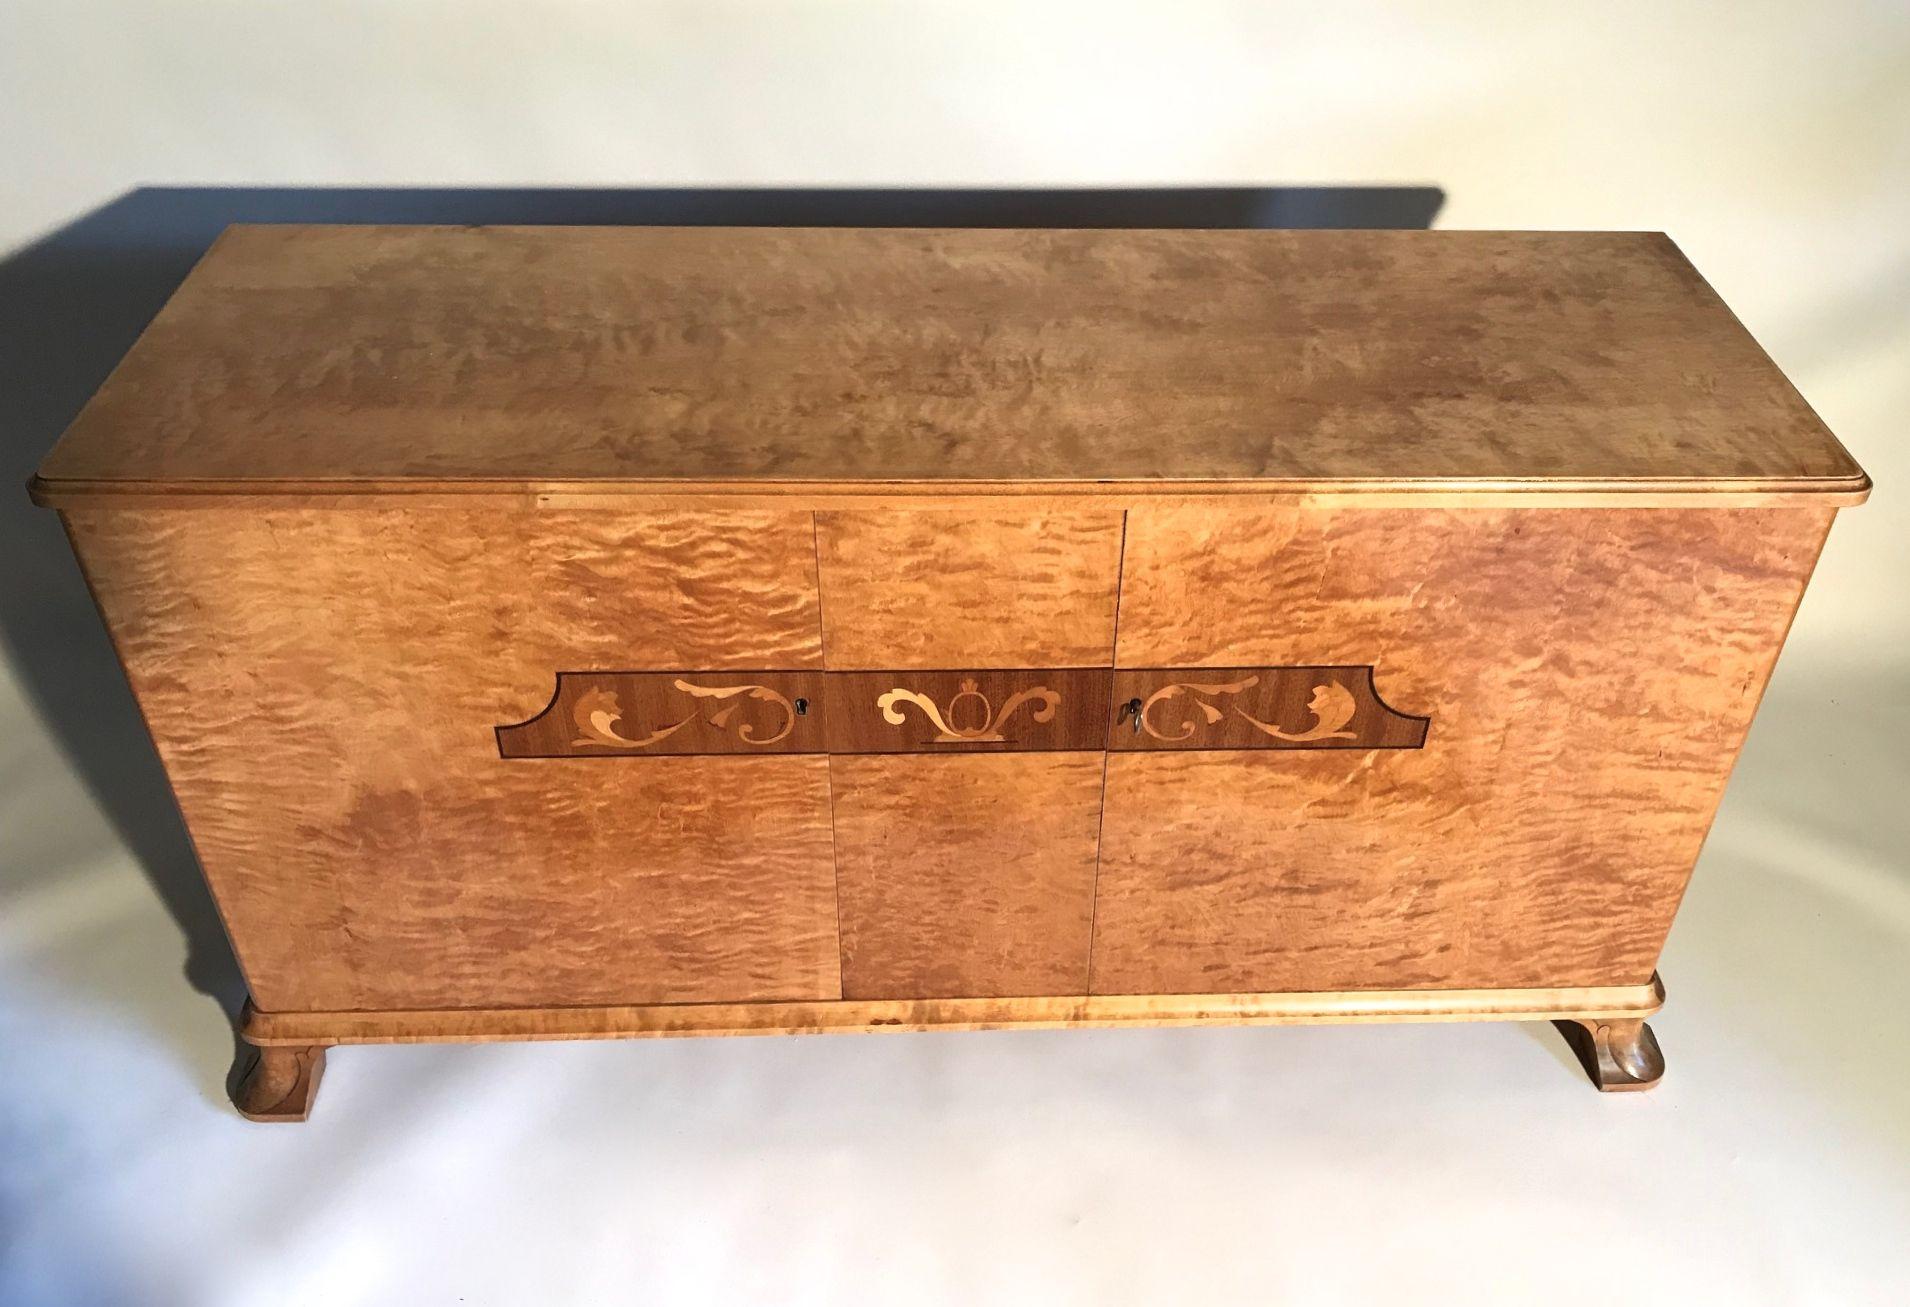 Swedish Art Deco flame birch sideboard with intarsia inlaid decoration of Palisander and exotic timbers. The interior having a fitted drawer and adjustable shelving. A perfectly proportioned piece to fit in any setting or space. Produced by Svenska